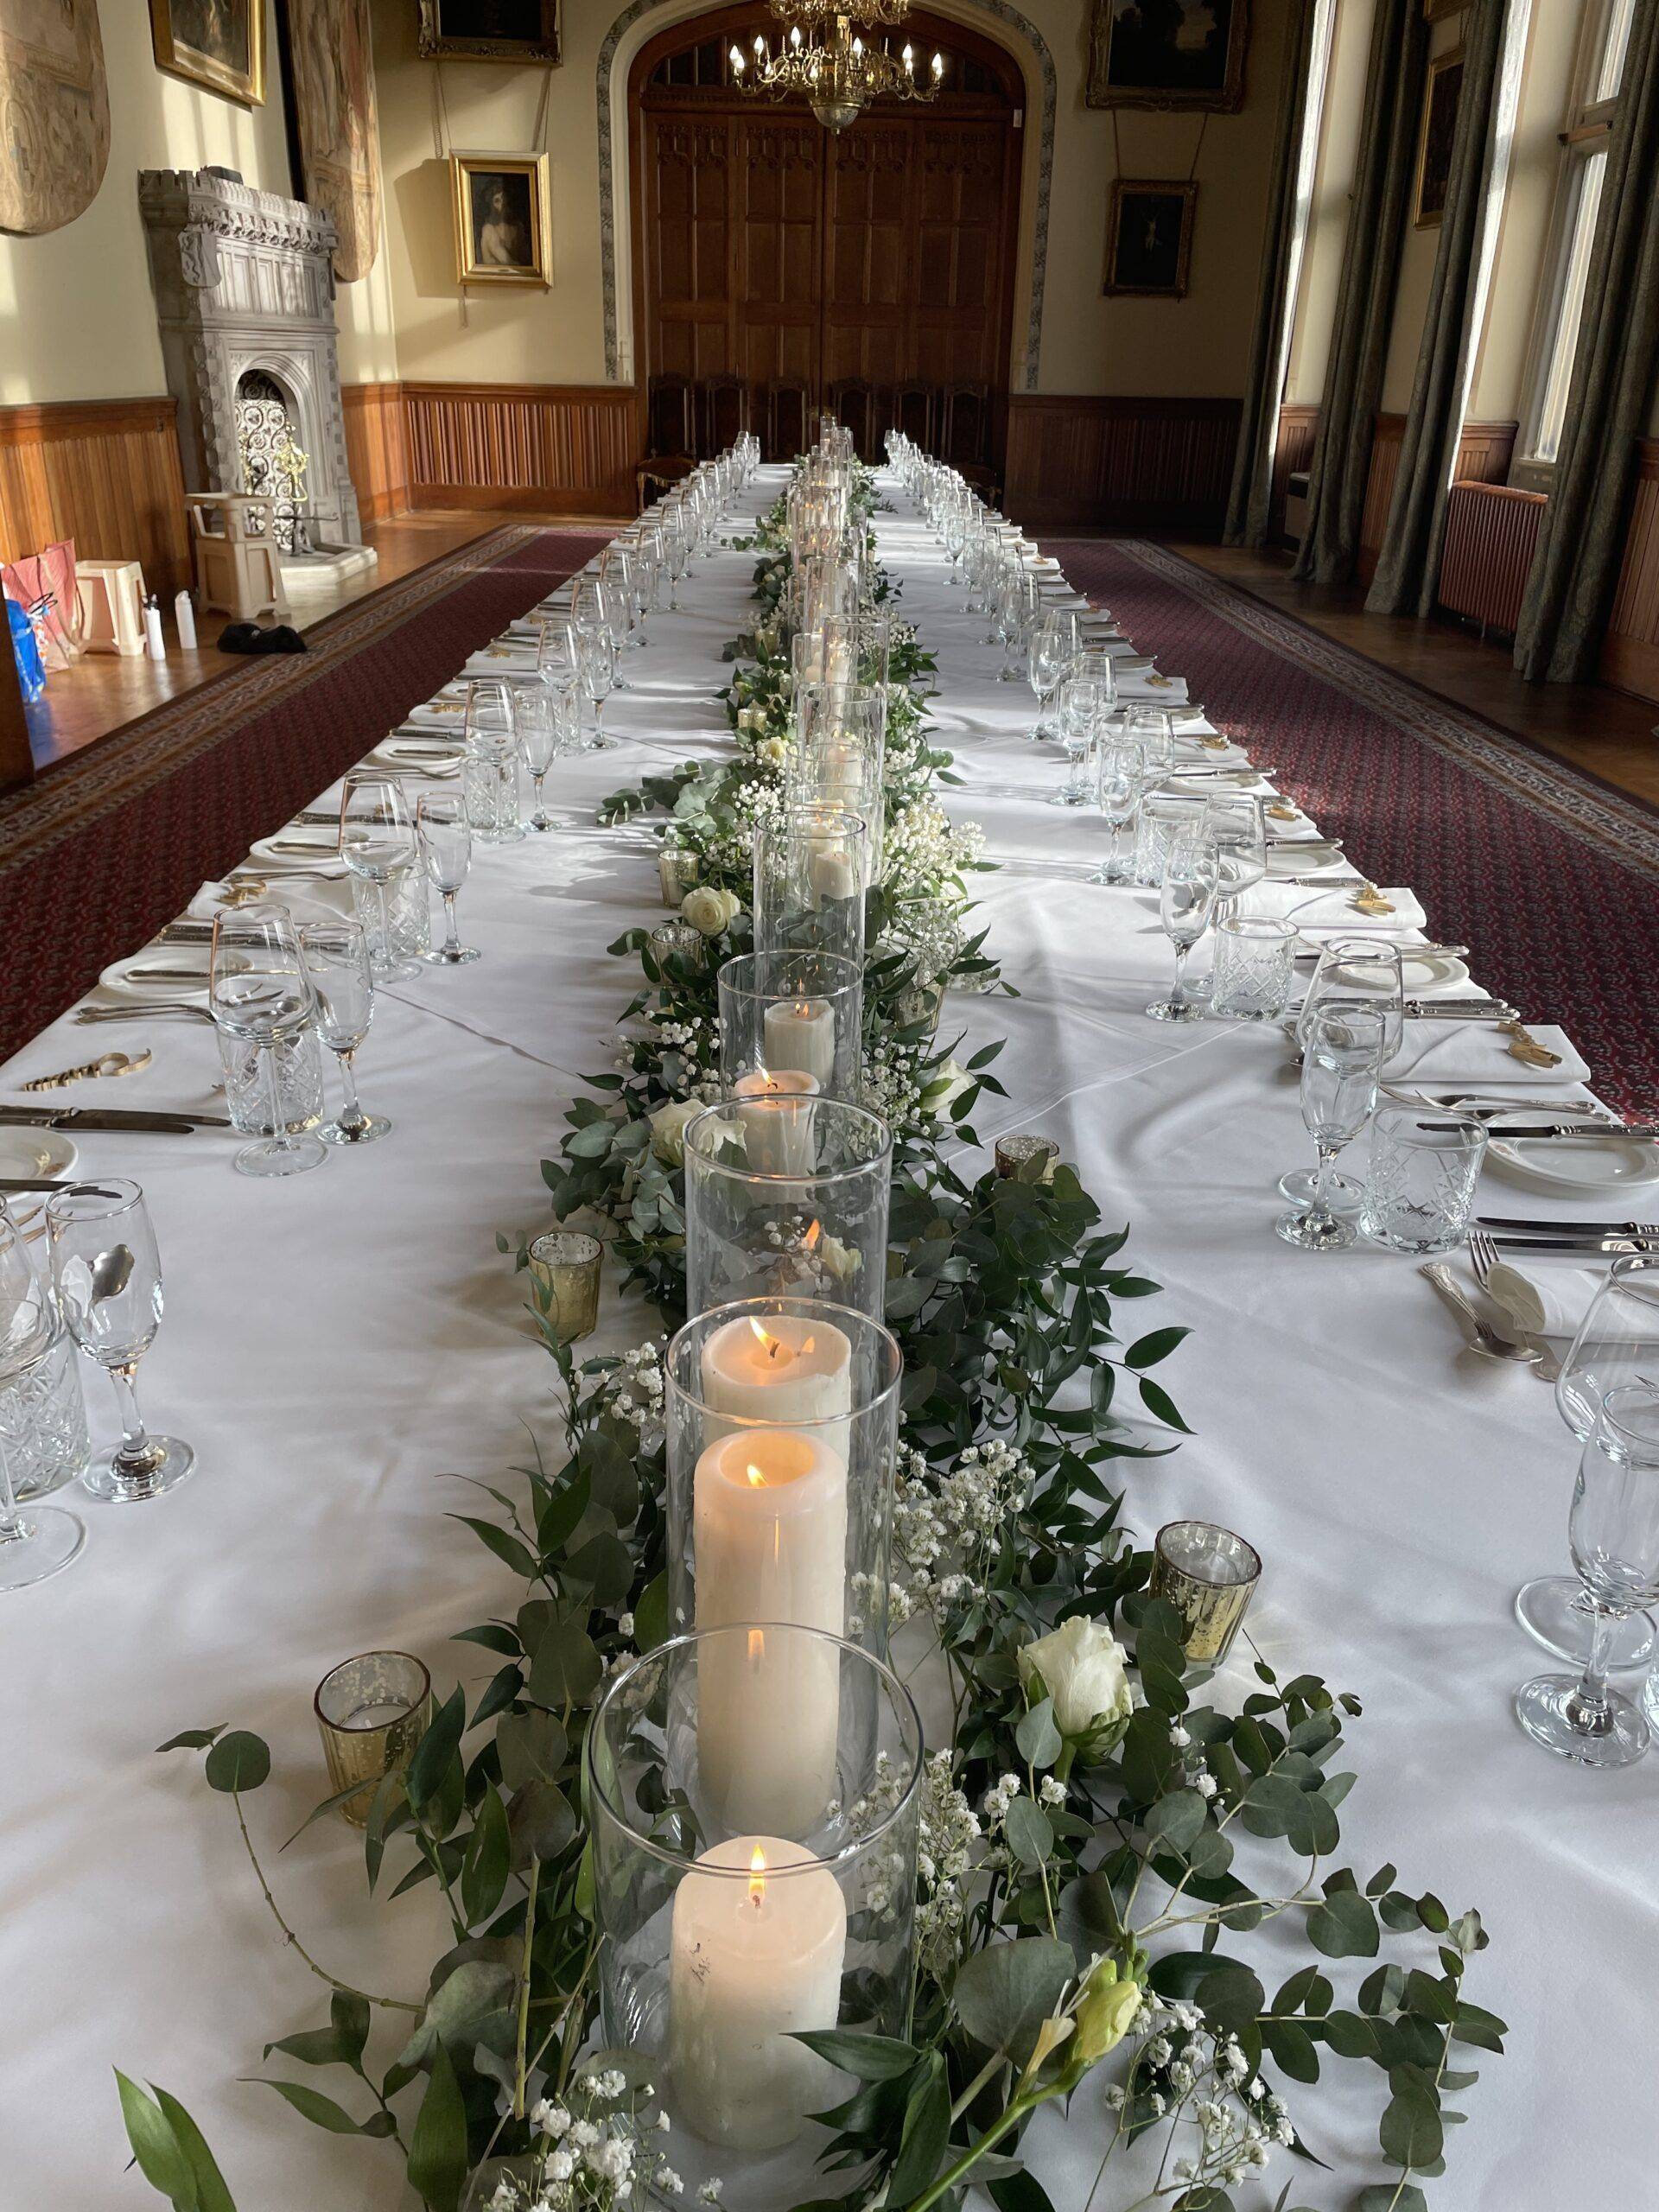 a long table with candles and flowers on it.